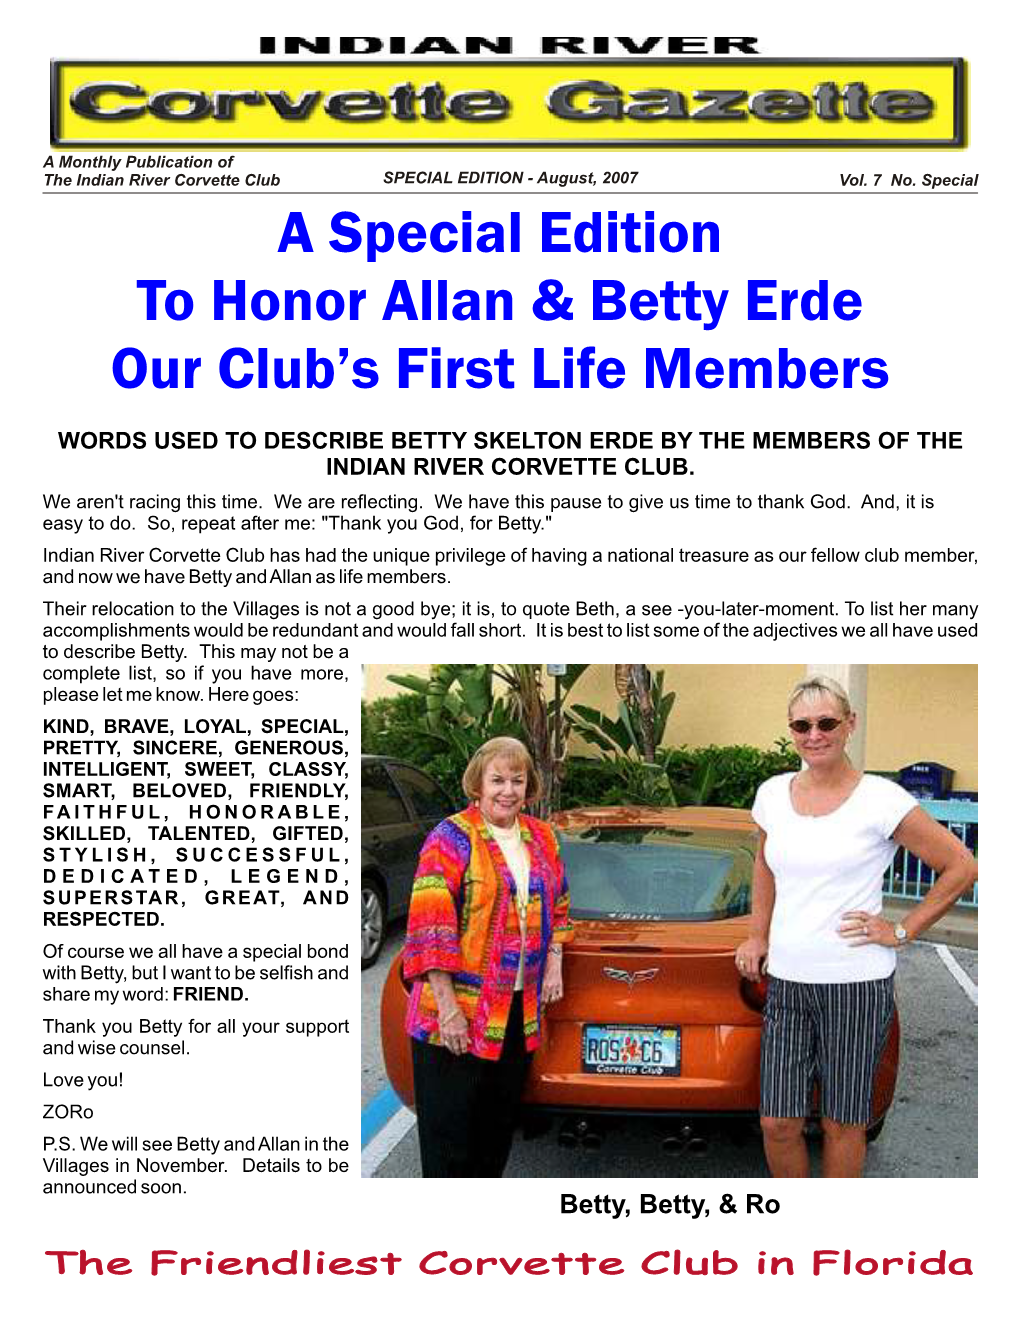 A Special Edition to Honor Allan & Betty Erde Our Club's First Life Members